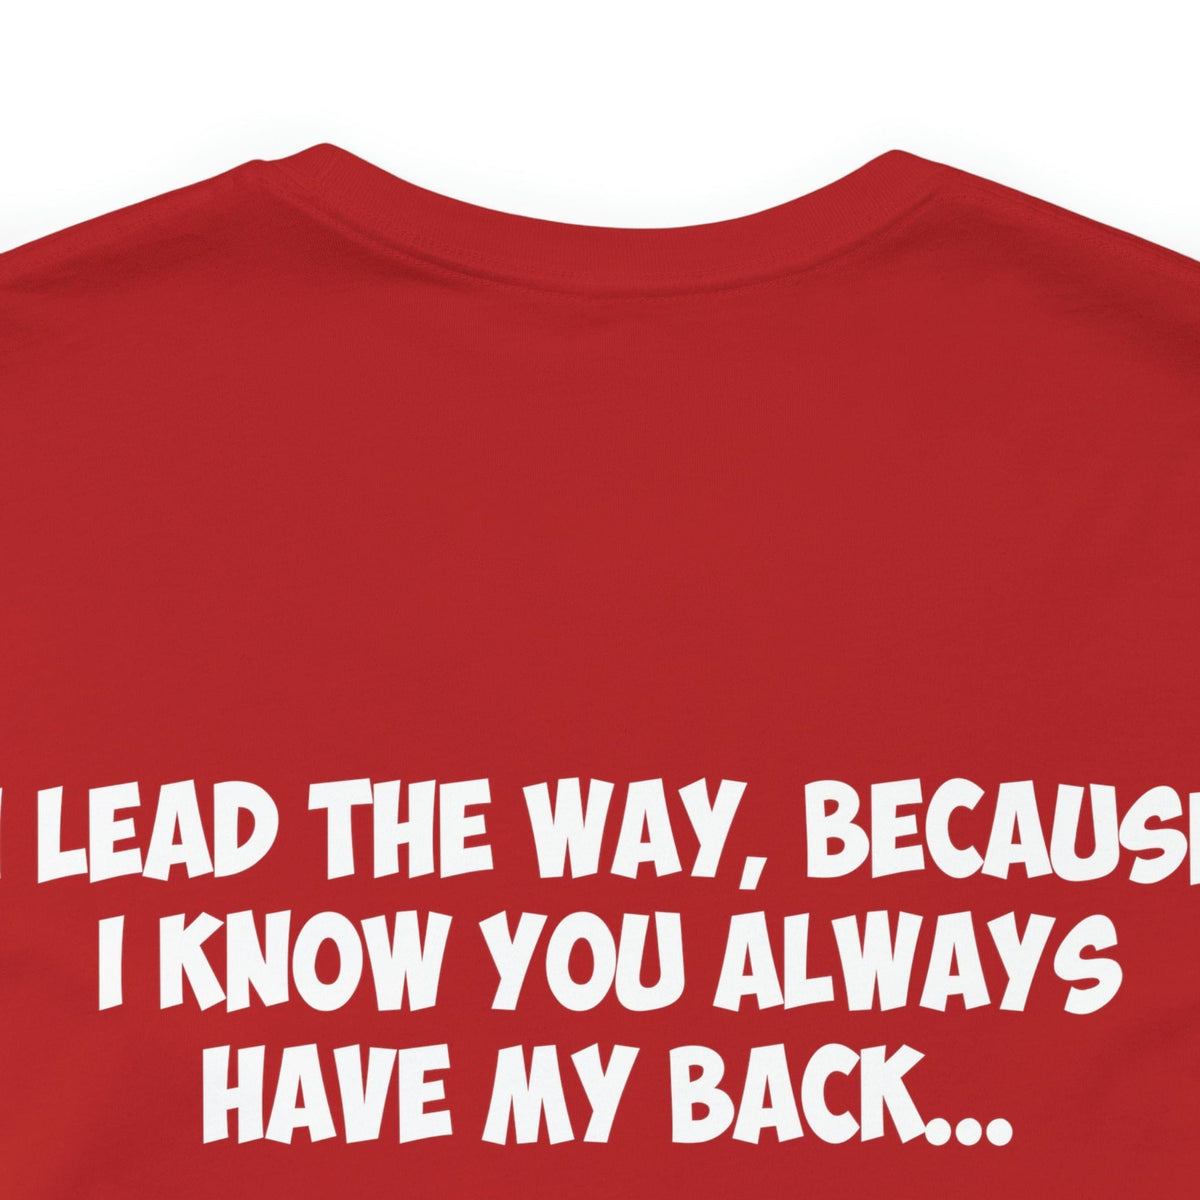 I Lead The Way, Because I know You Always Have My Back...